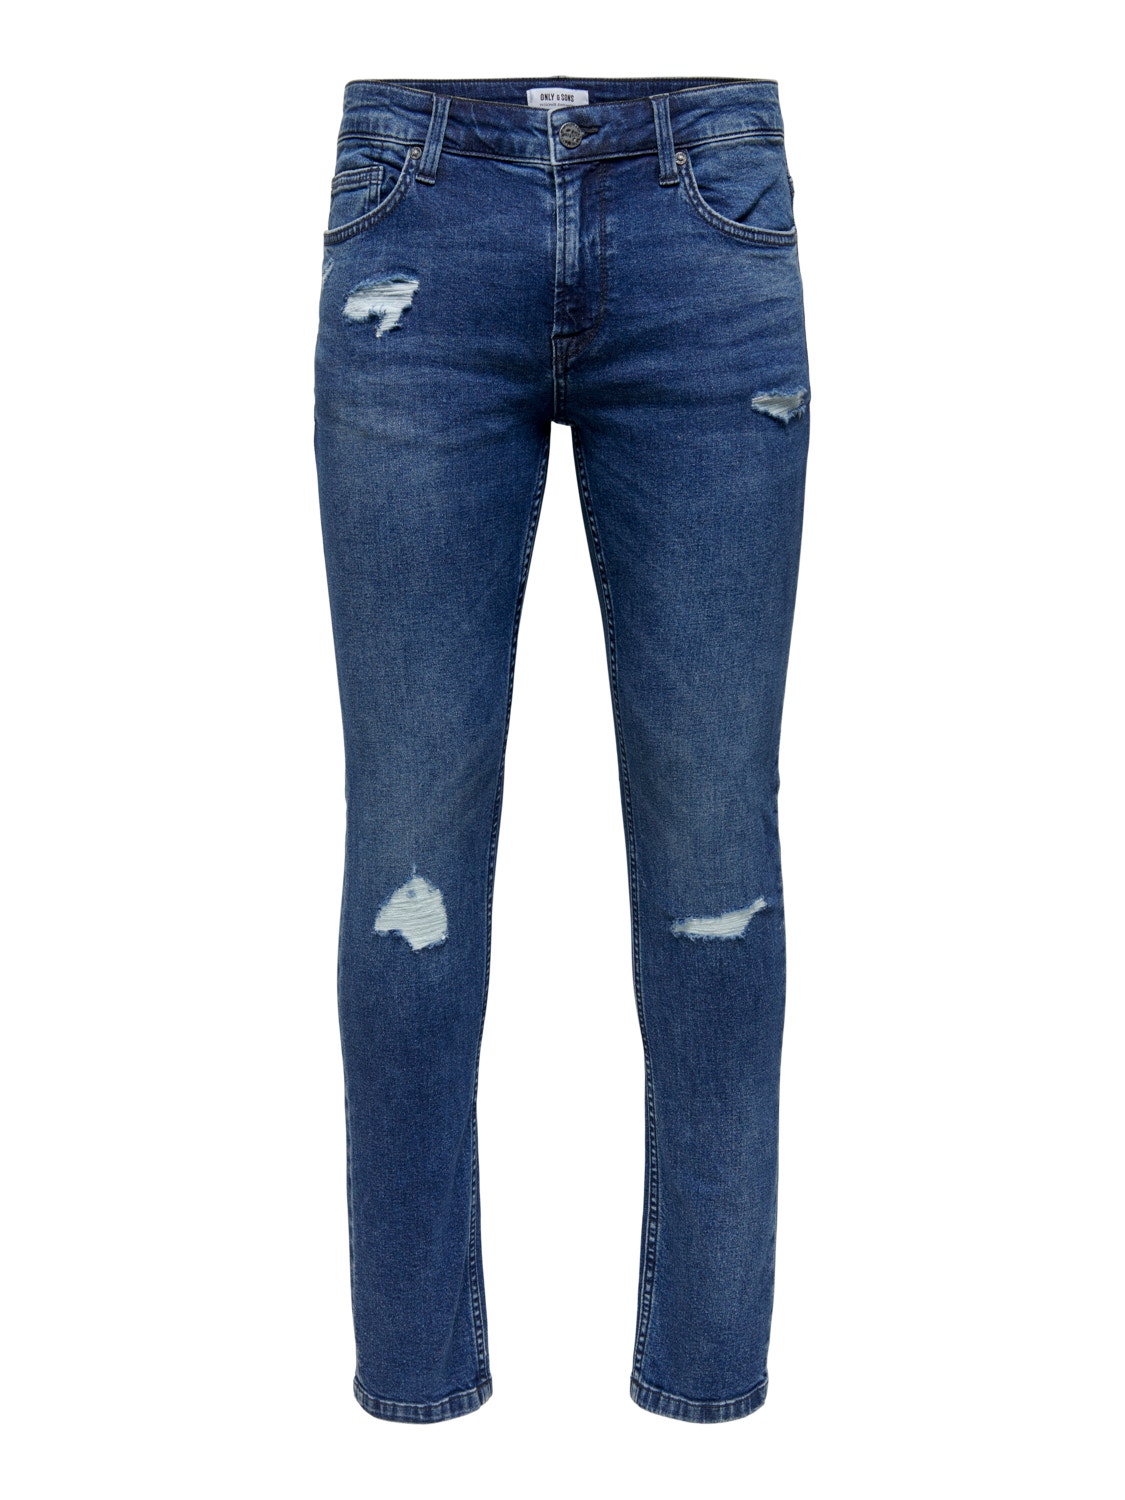 ONLY & SONS Jeans Slim Fit Taille moyenne Ourlé destroy -Blue Denim - 22022374